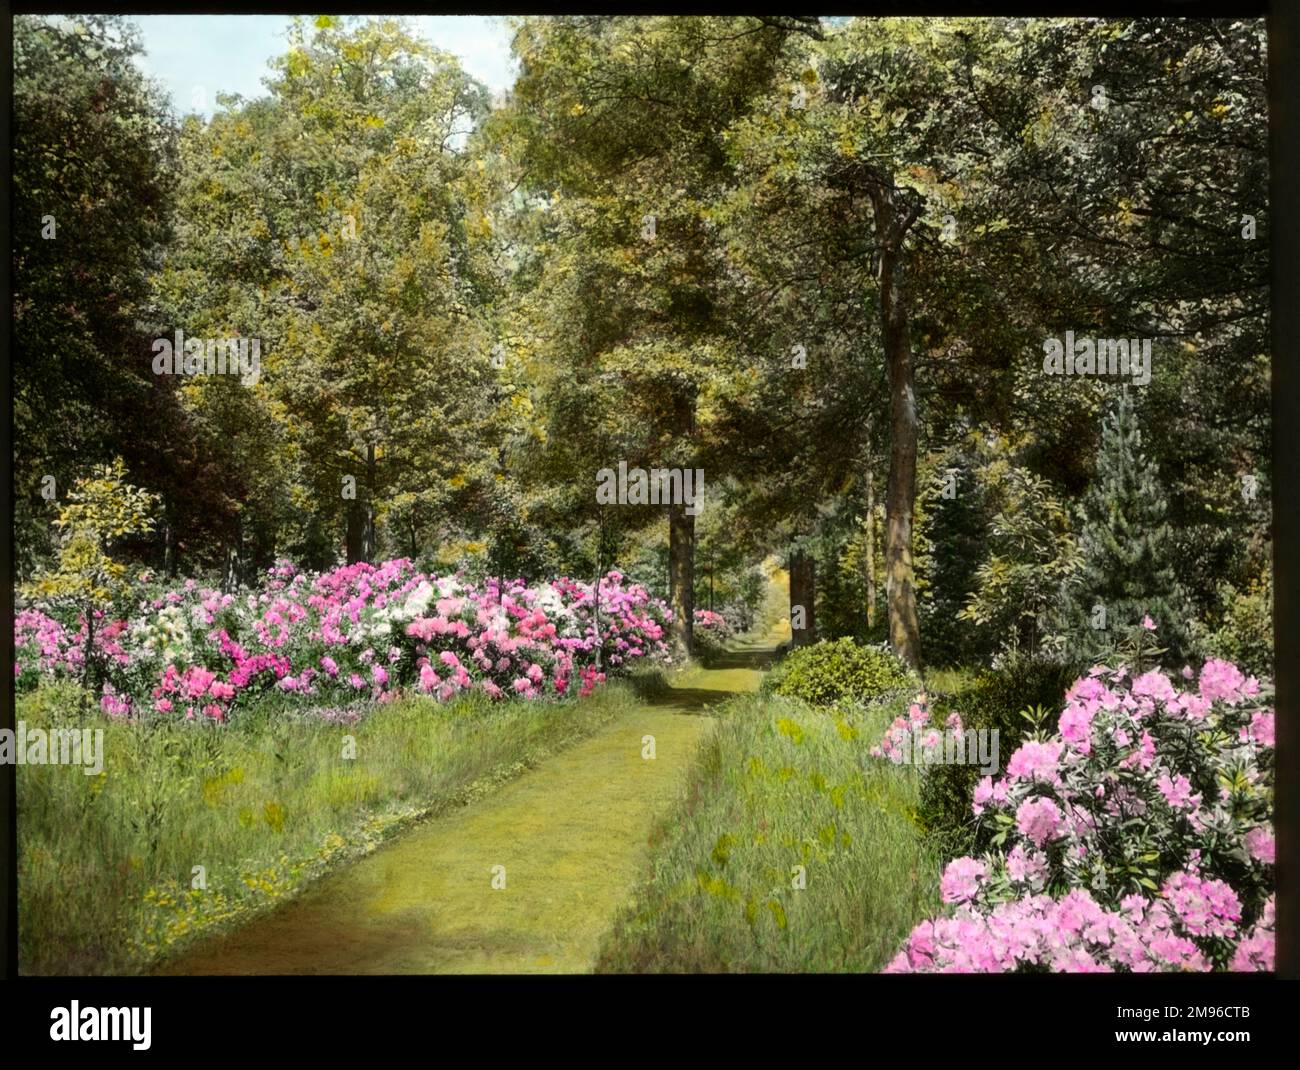 View of the gardens at Aldenham House, near Borehamwood, Hertfordshire, with pink and white rhododendrons (a flowering plant of the Ericaceae family), growing on either side of a grassy pathway. Stock Photo